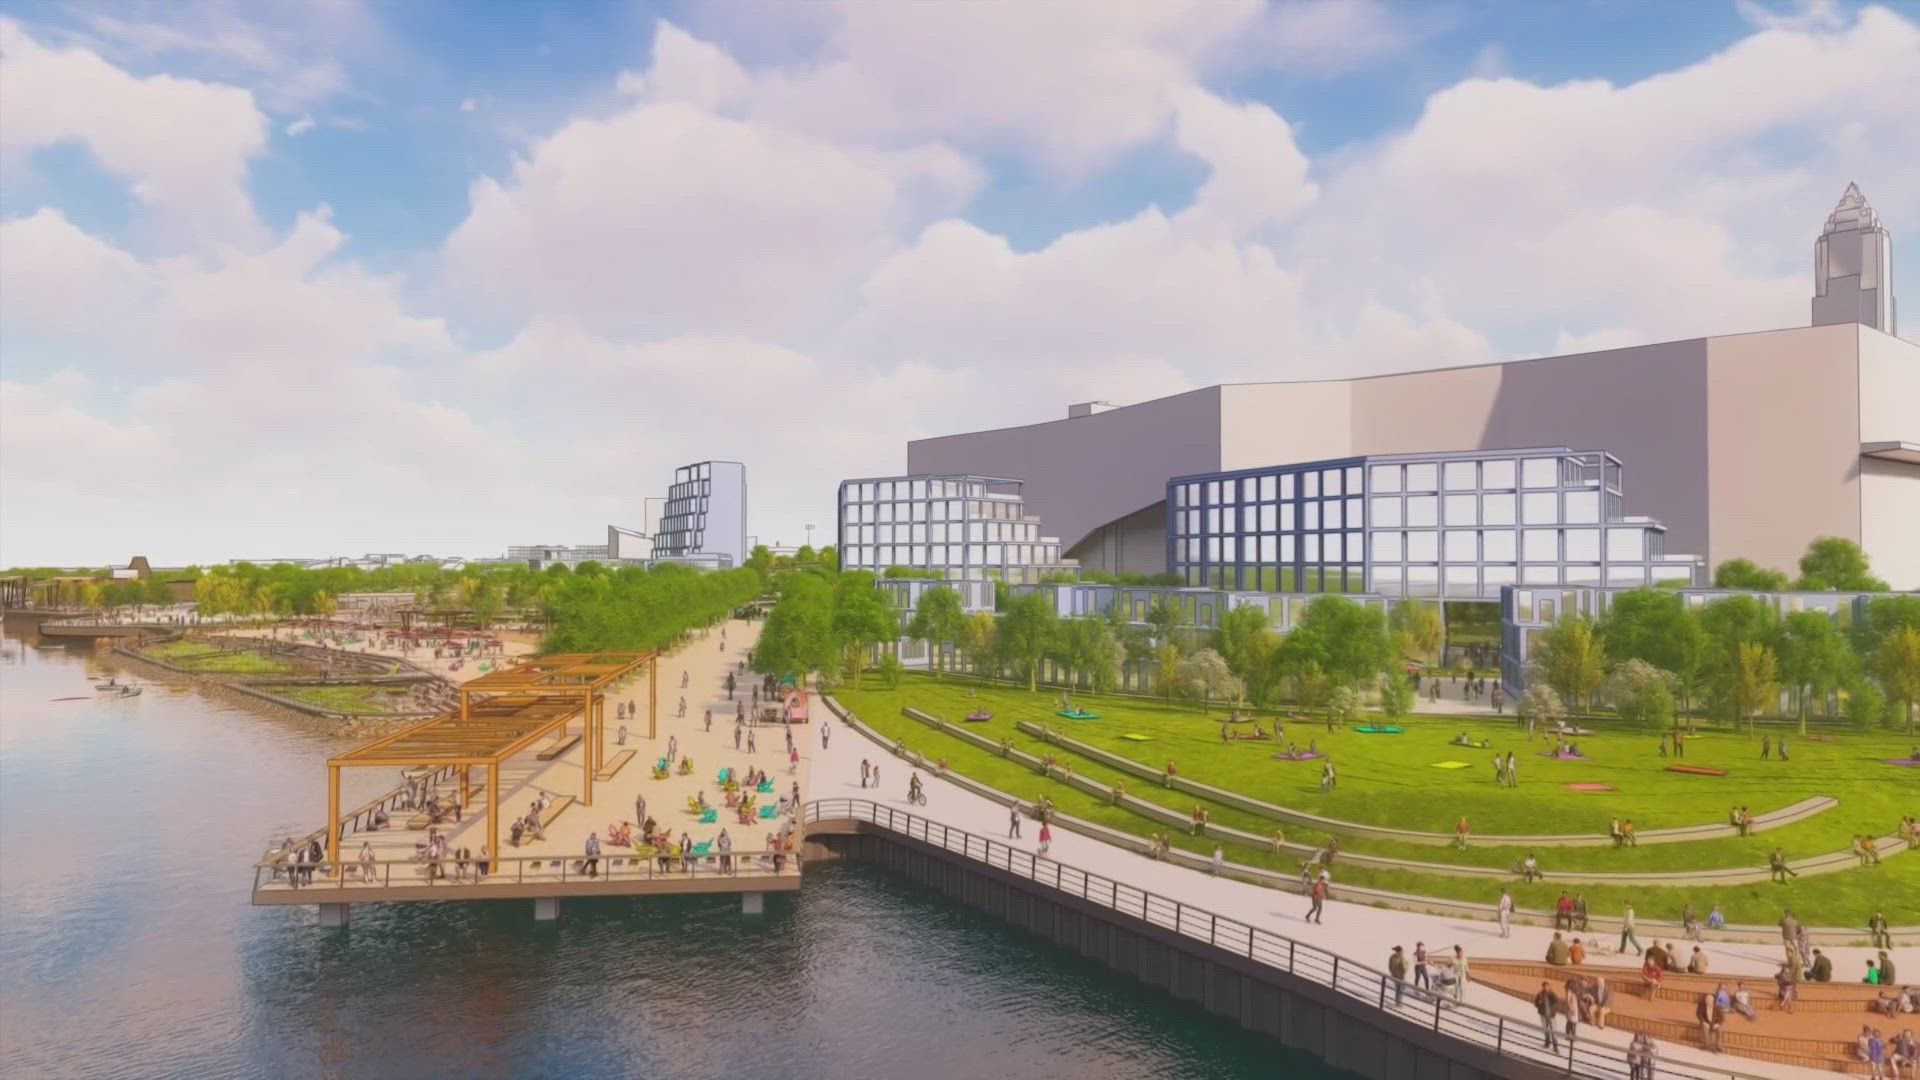 The expanded vision for the future of Cleveland's lakefront was presented Friday at the Rock & Roll Hall of Fame.